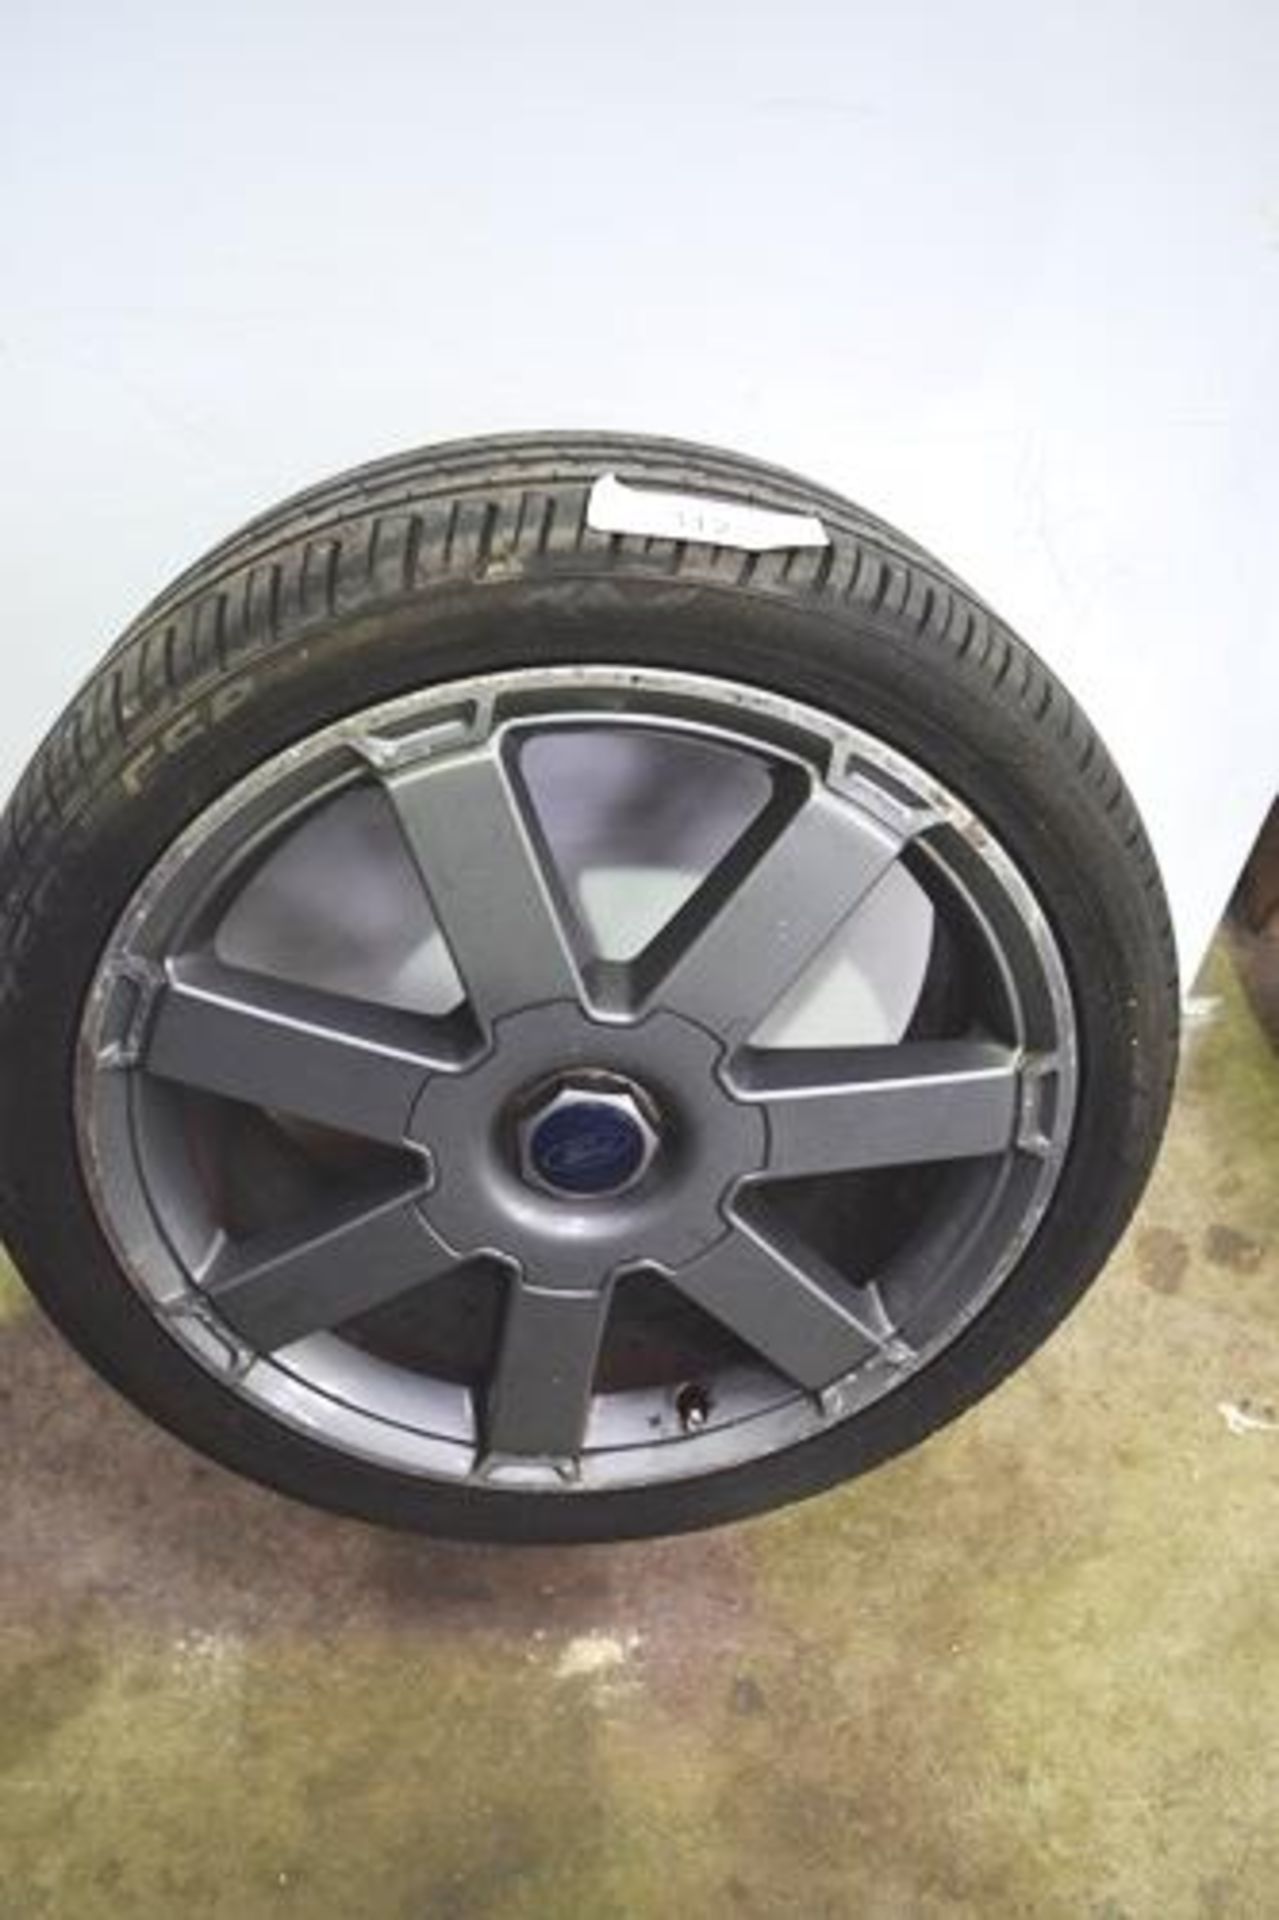 1 x Ford 5 stud alloy wheel fitted with Cooper Zeon C58 tyre, size 225/40R18 - Second-hand (GSend) - Image 2 of 3